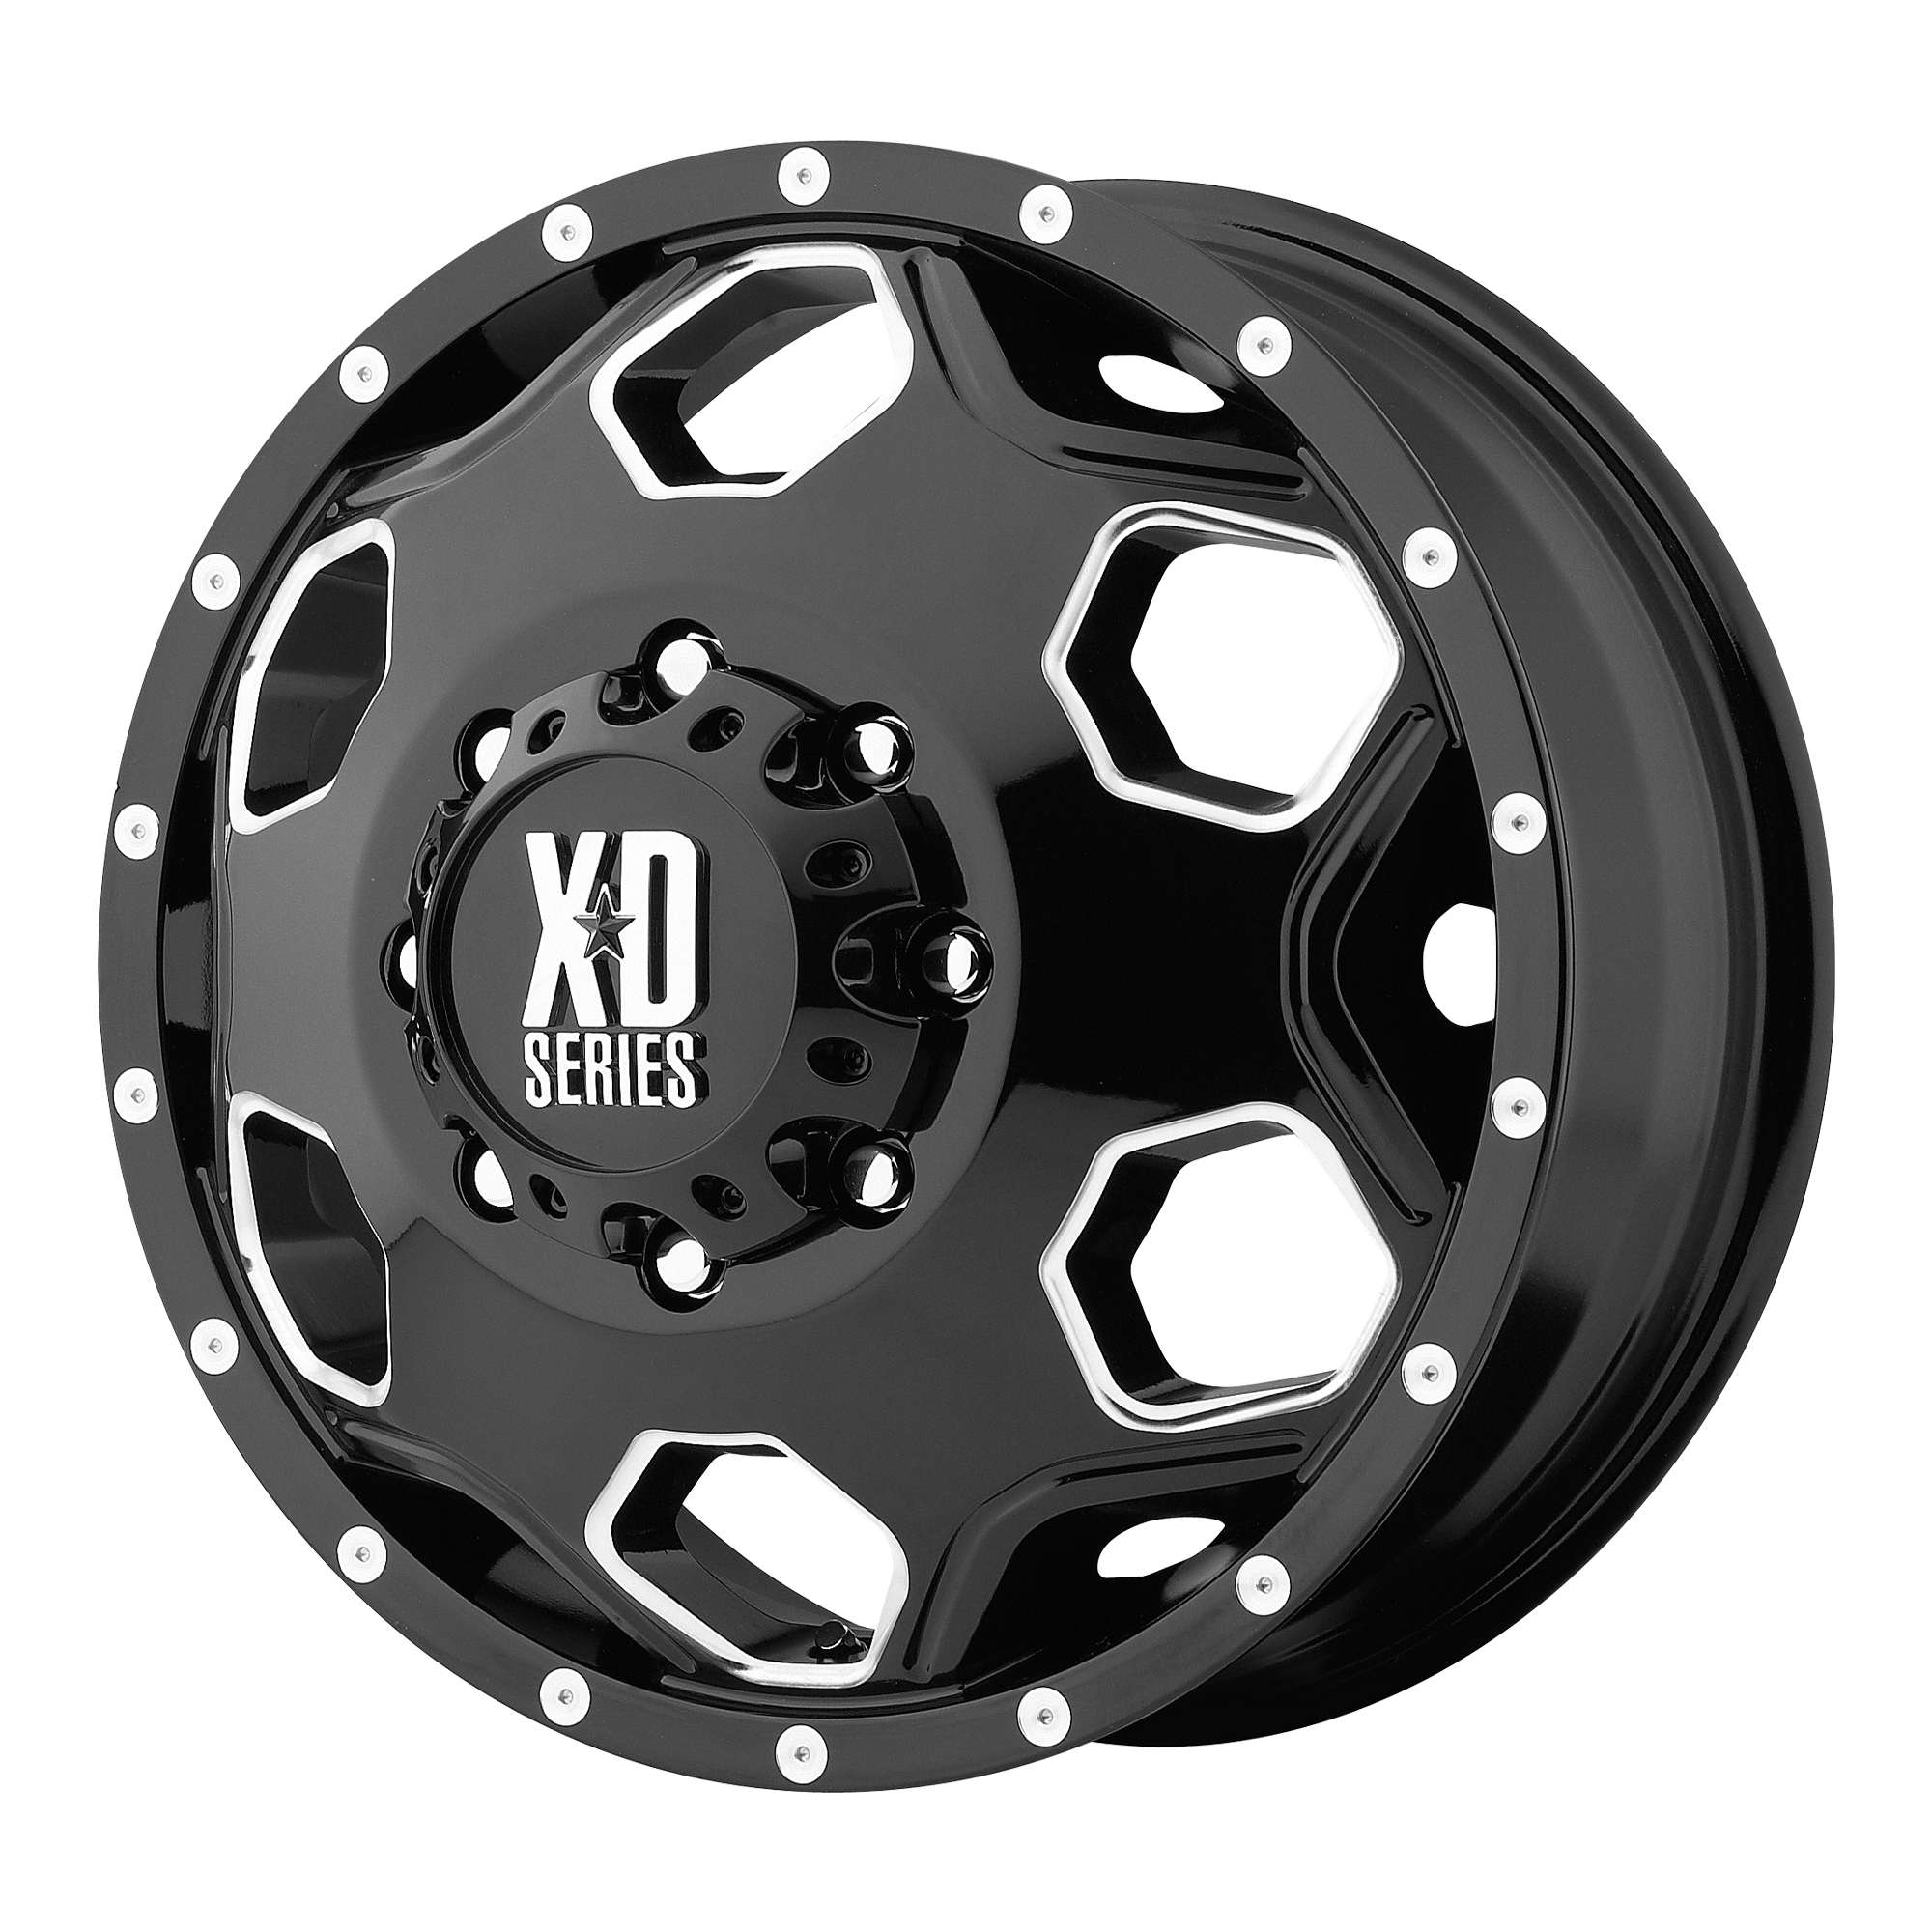 XD XD815 BATALLION GLOSS BLACK WITH MILLED ACCENTS WHEELS | 22X8.25 | 8X165.1 | OFFSET: -175MM | CB: 125.1MM